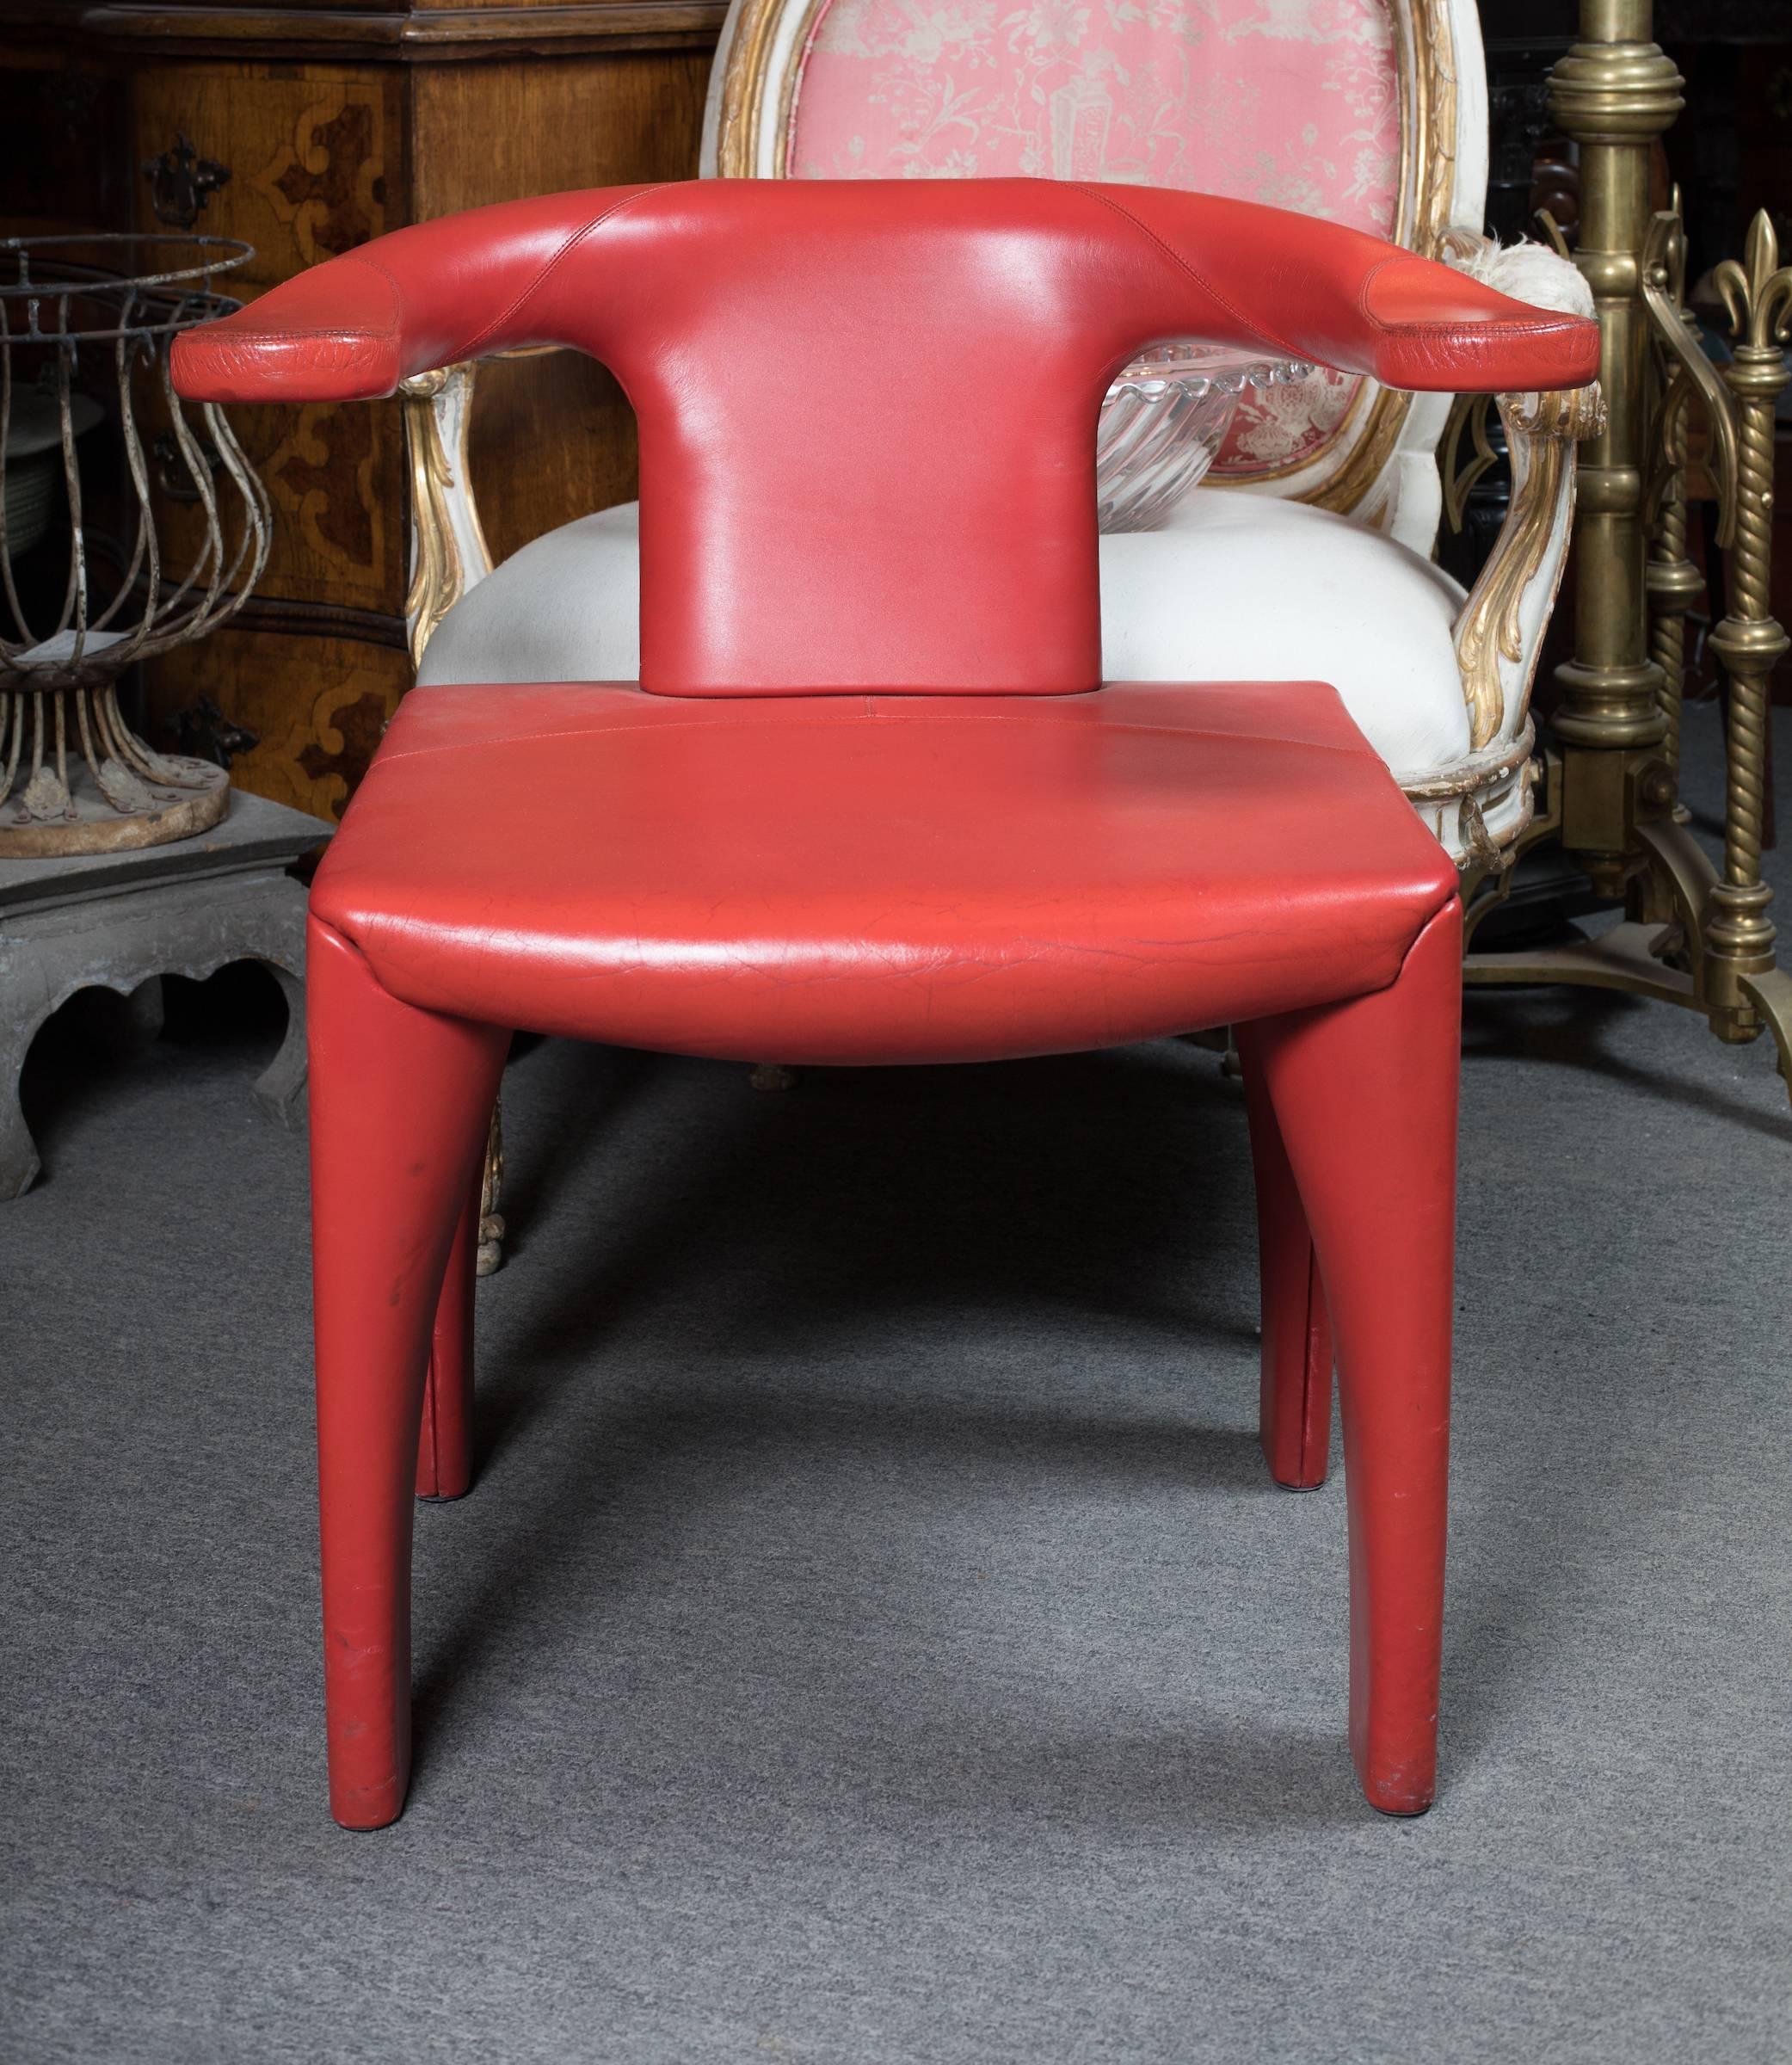 Unusual stitched red leather modernist chair, designed after a Chinese 